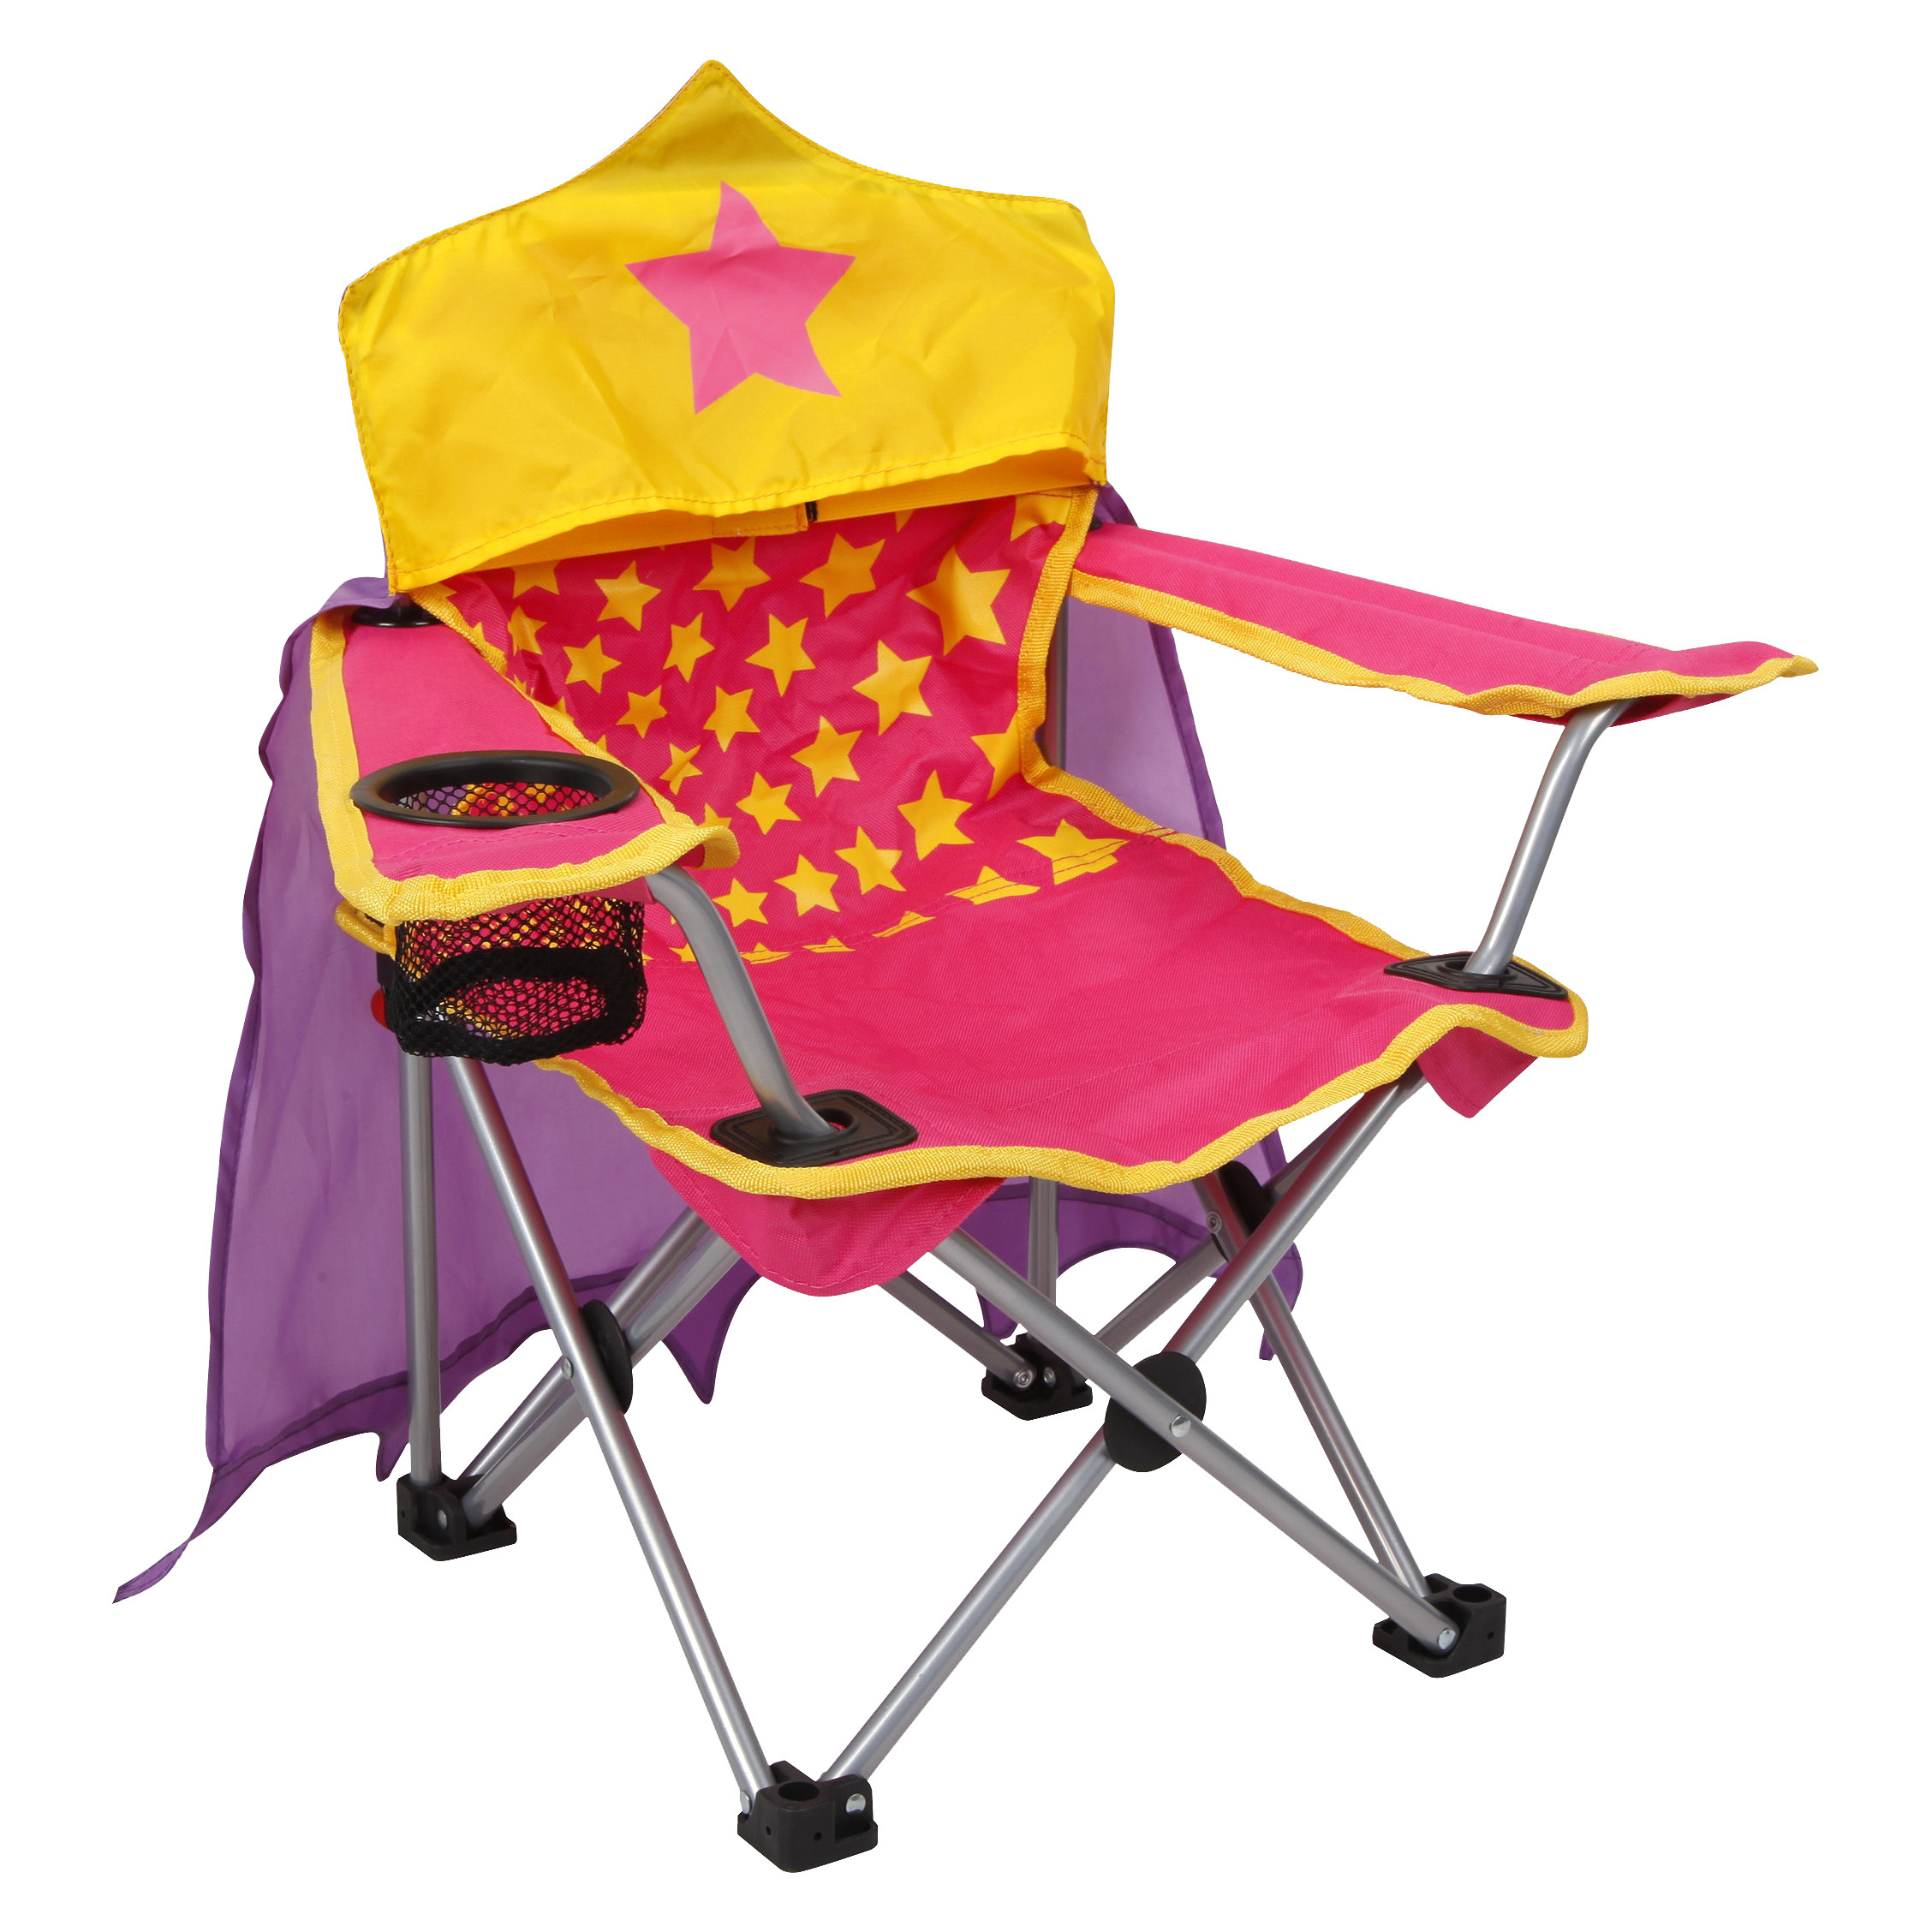 Kids Folding Camp Chair
 Tar and Warner Bros Consumer Products Team Up to